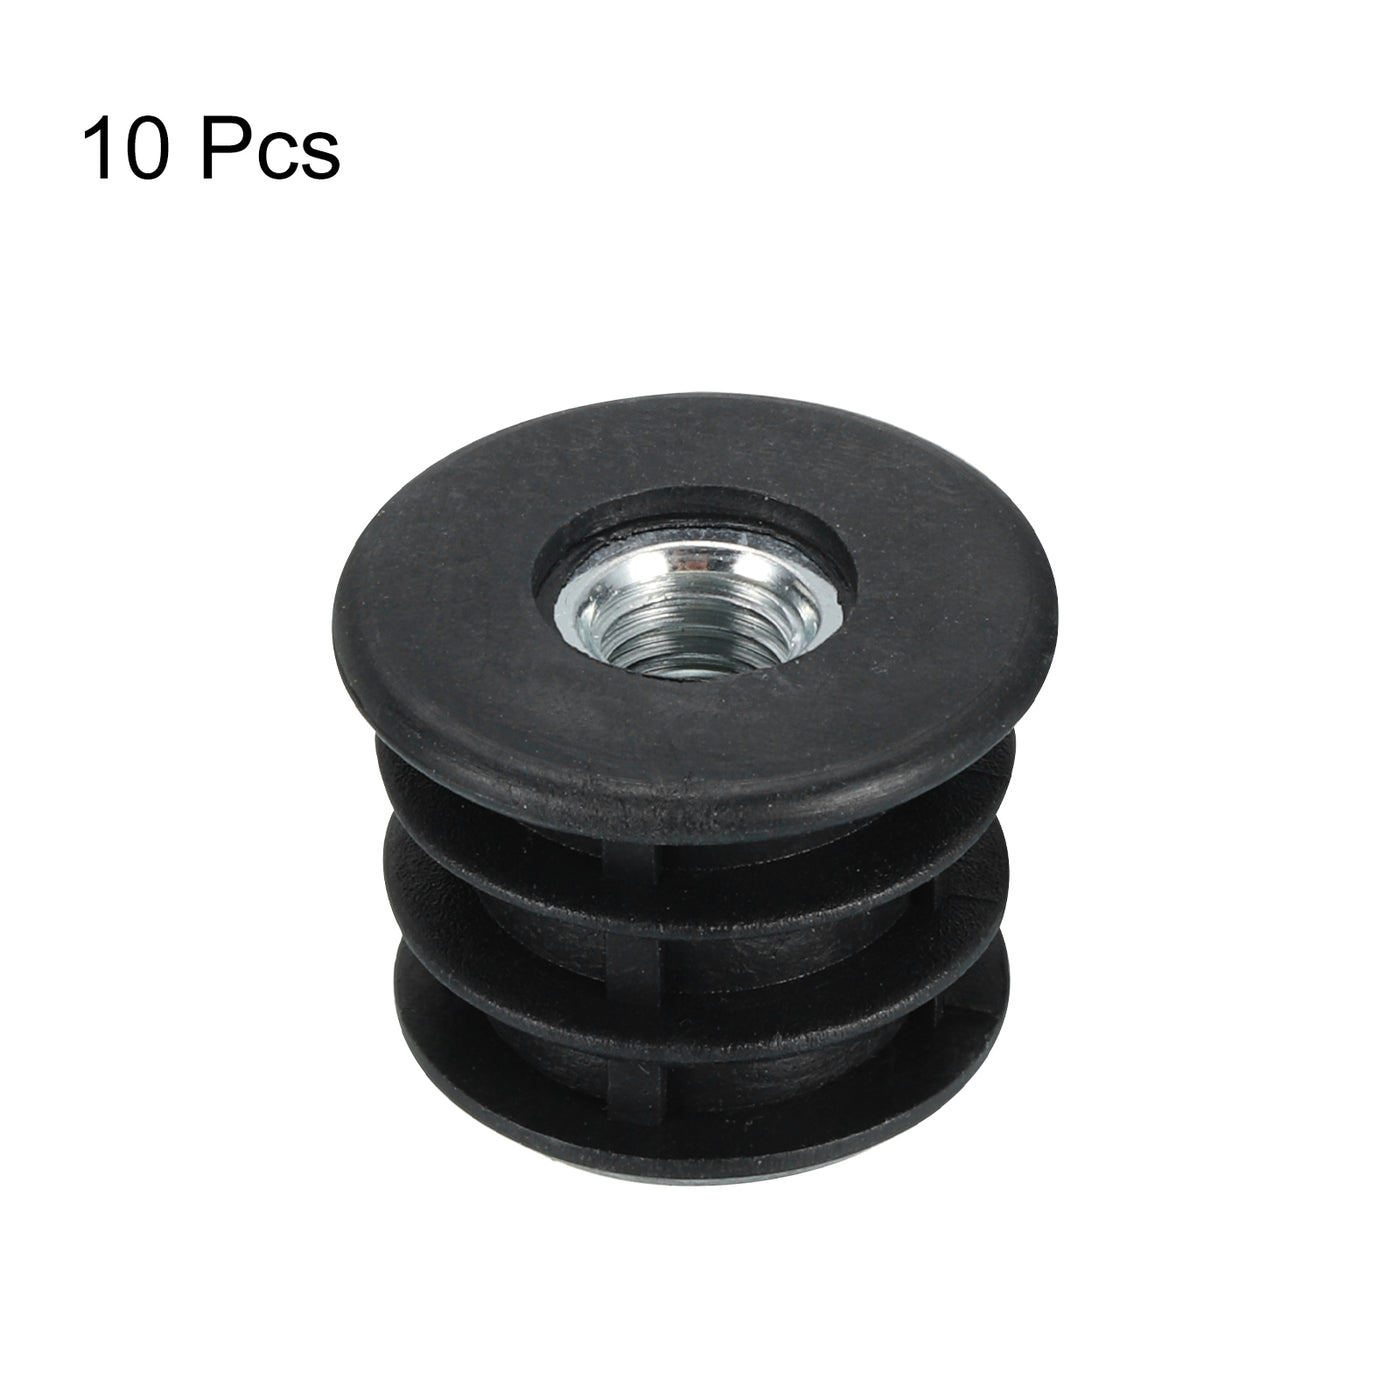 uxcell Uxcell 10Pcs Caster Insert with Thread, 25mm/0.98" M8 Thread